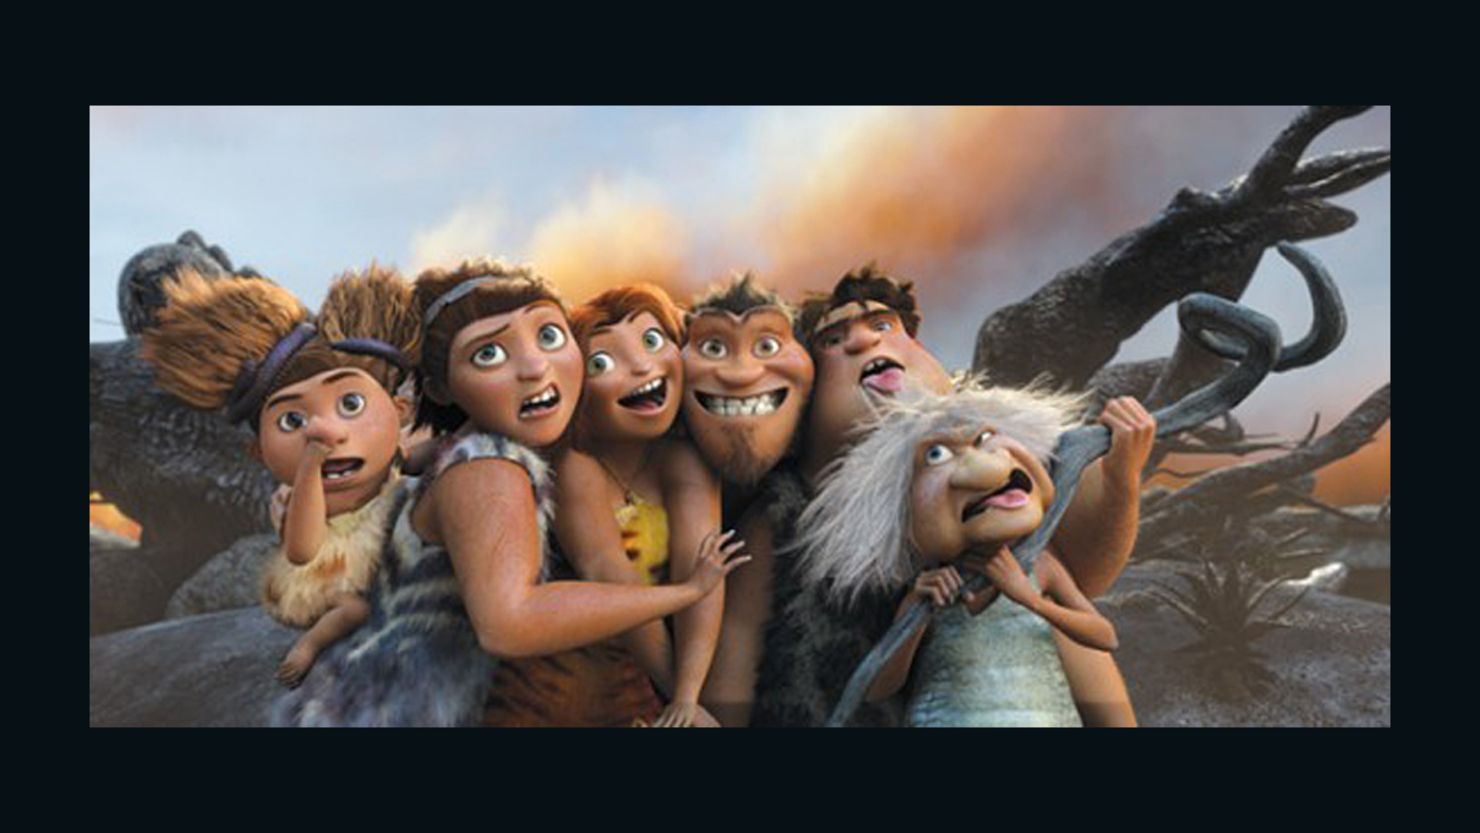 "The Croods" features the voice talent of Emma Stone, Ryan Reynolds, Nicolas Cage, and Catherine Keener.